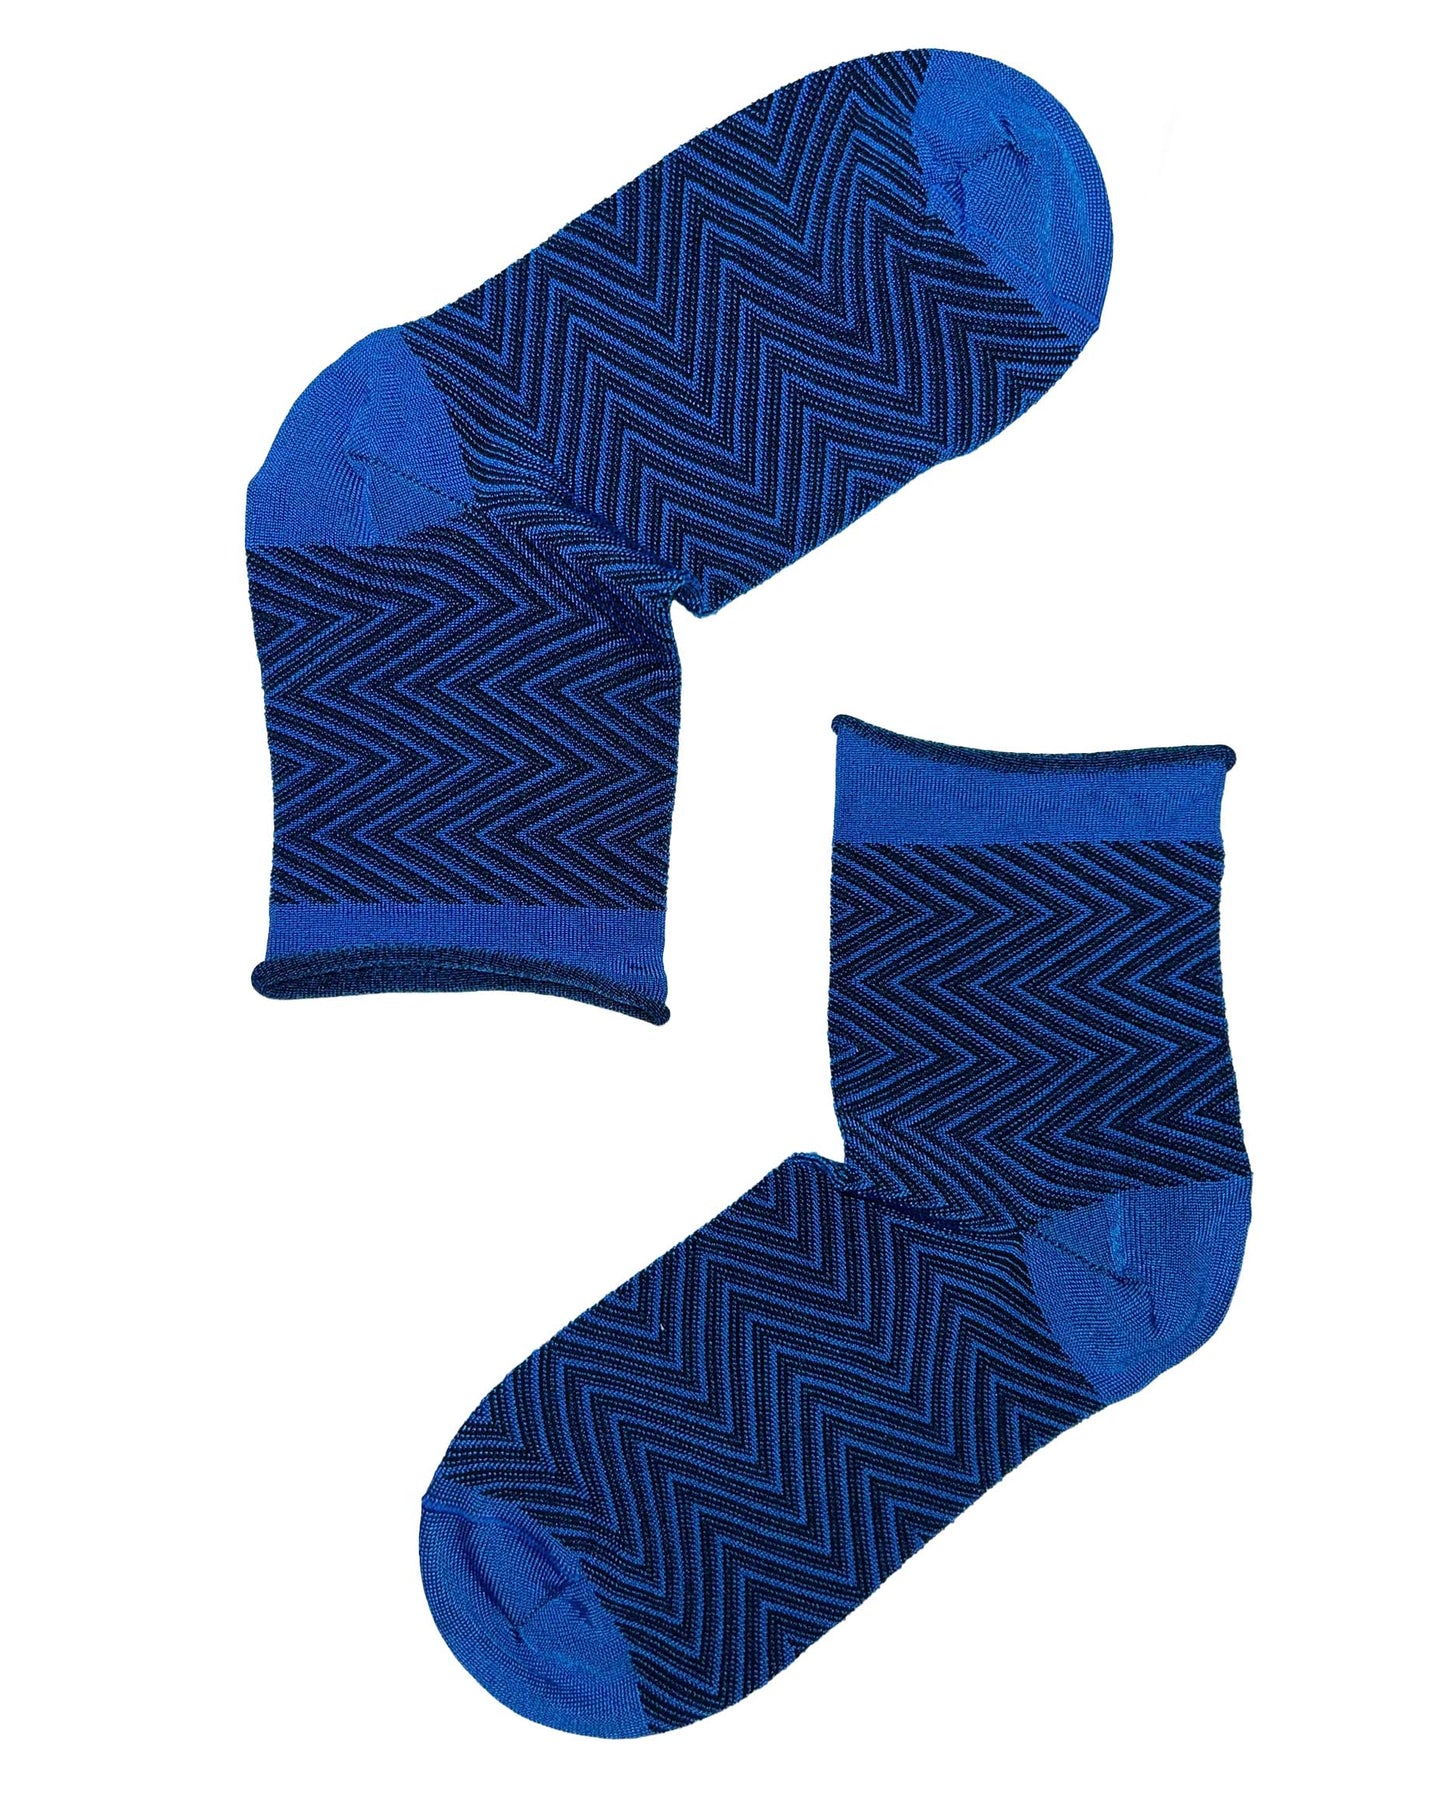 SiSi Spinato Calzino - Blue and black fashion viscose sock with contrasting zig-zag herringbone style pattern, shaped heel and flat toe seam and a raw cut roll top comfort edged cuff. 